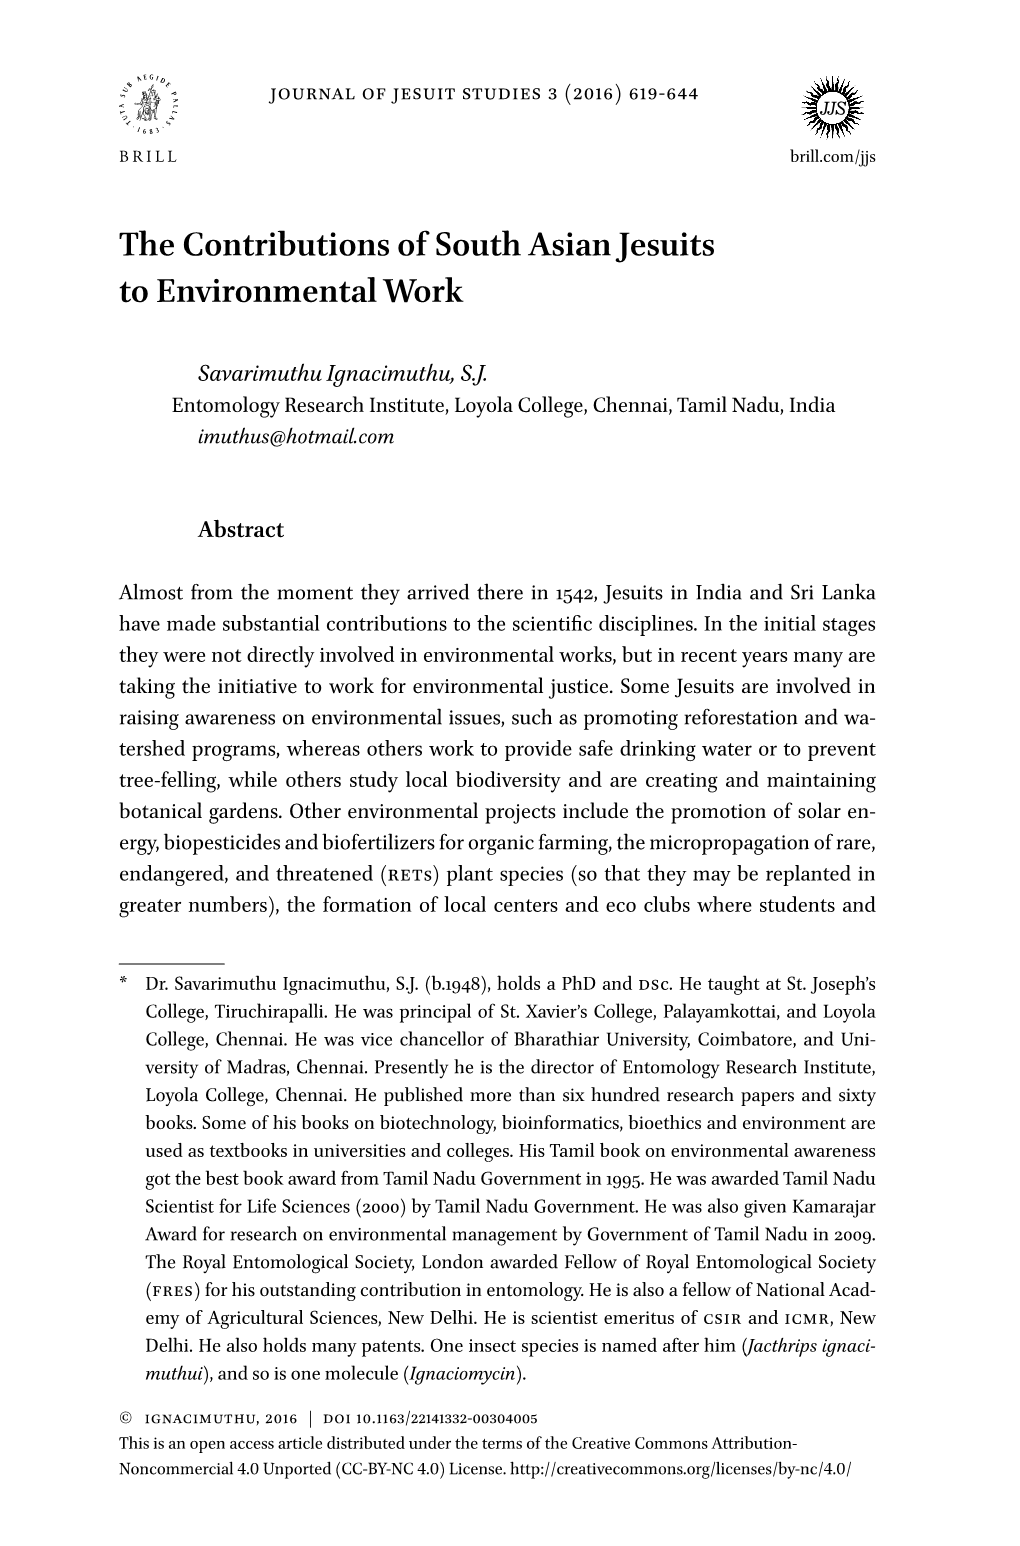 The Contributions of South Asian Jesuits to Environmental Work